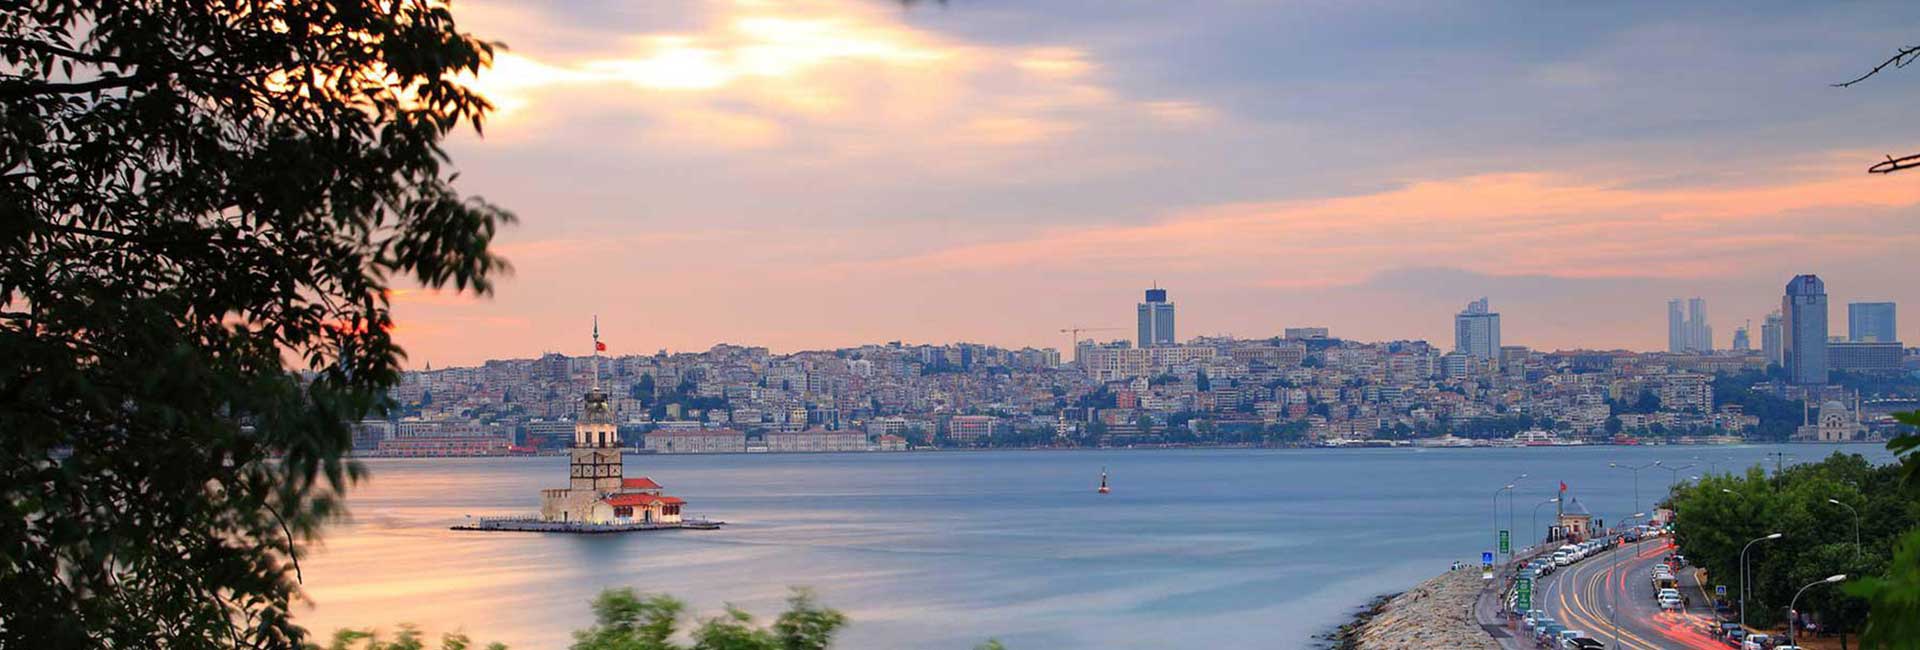 Sightseeing and city tours of Istanbul